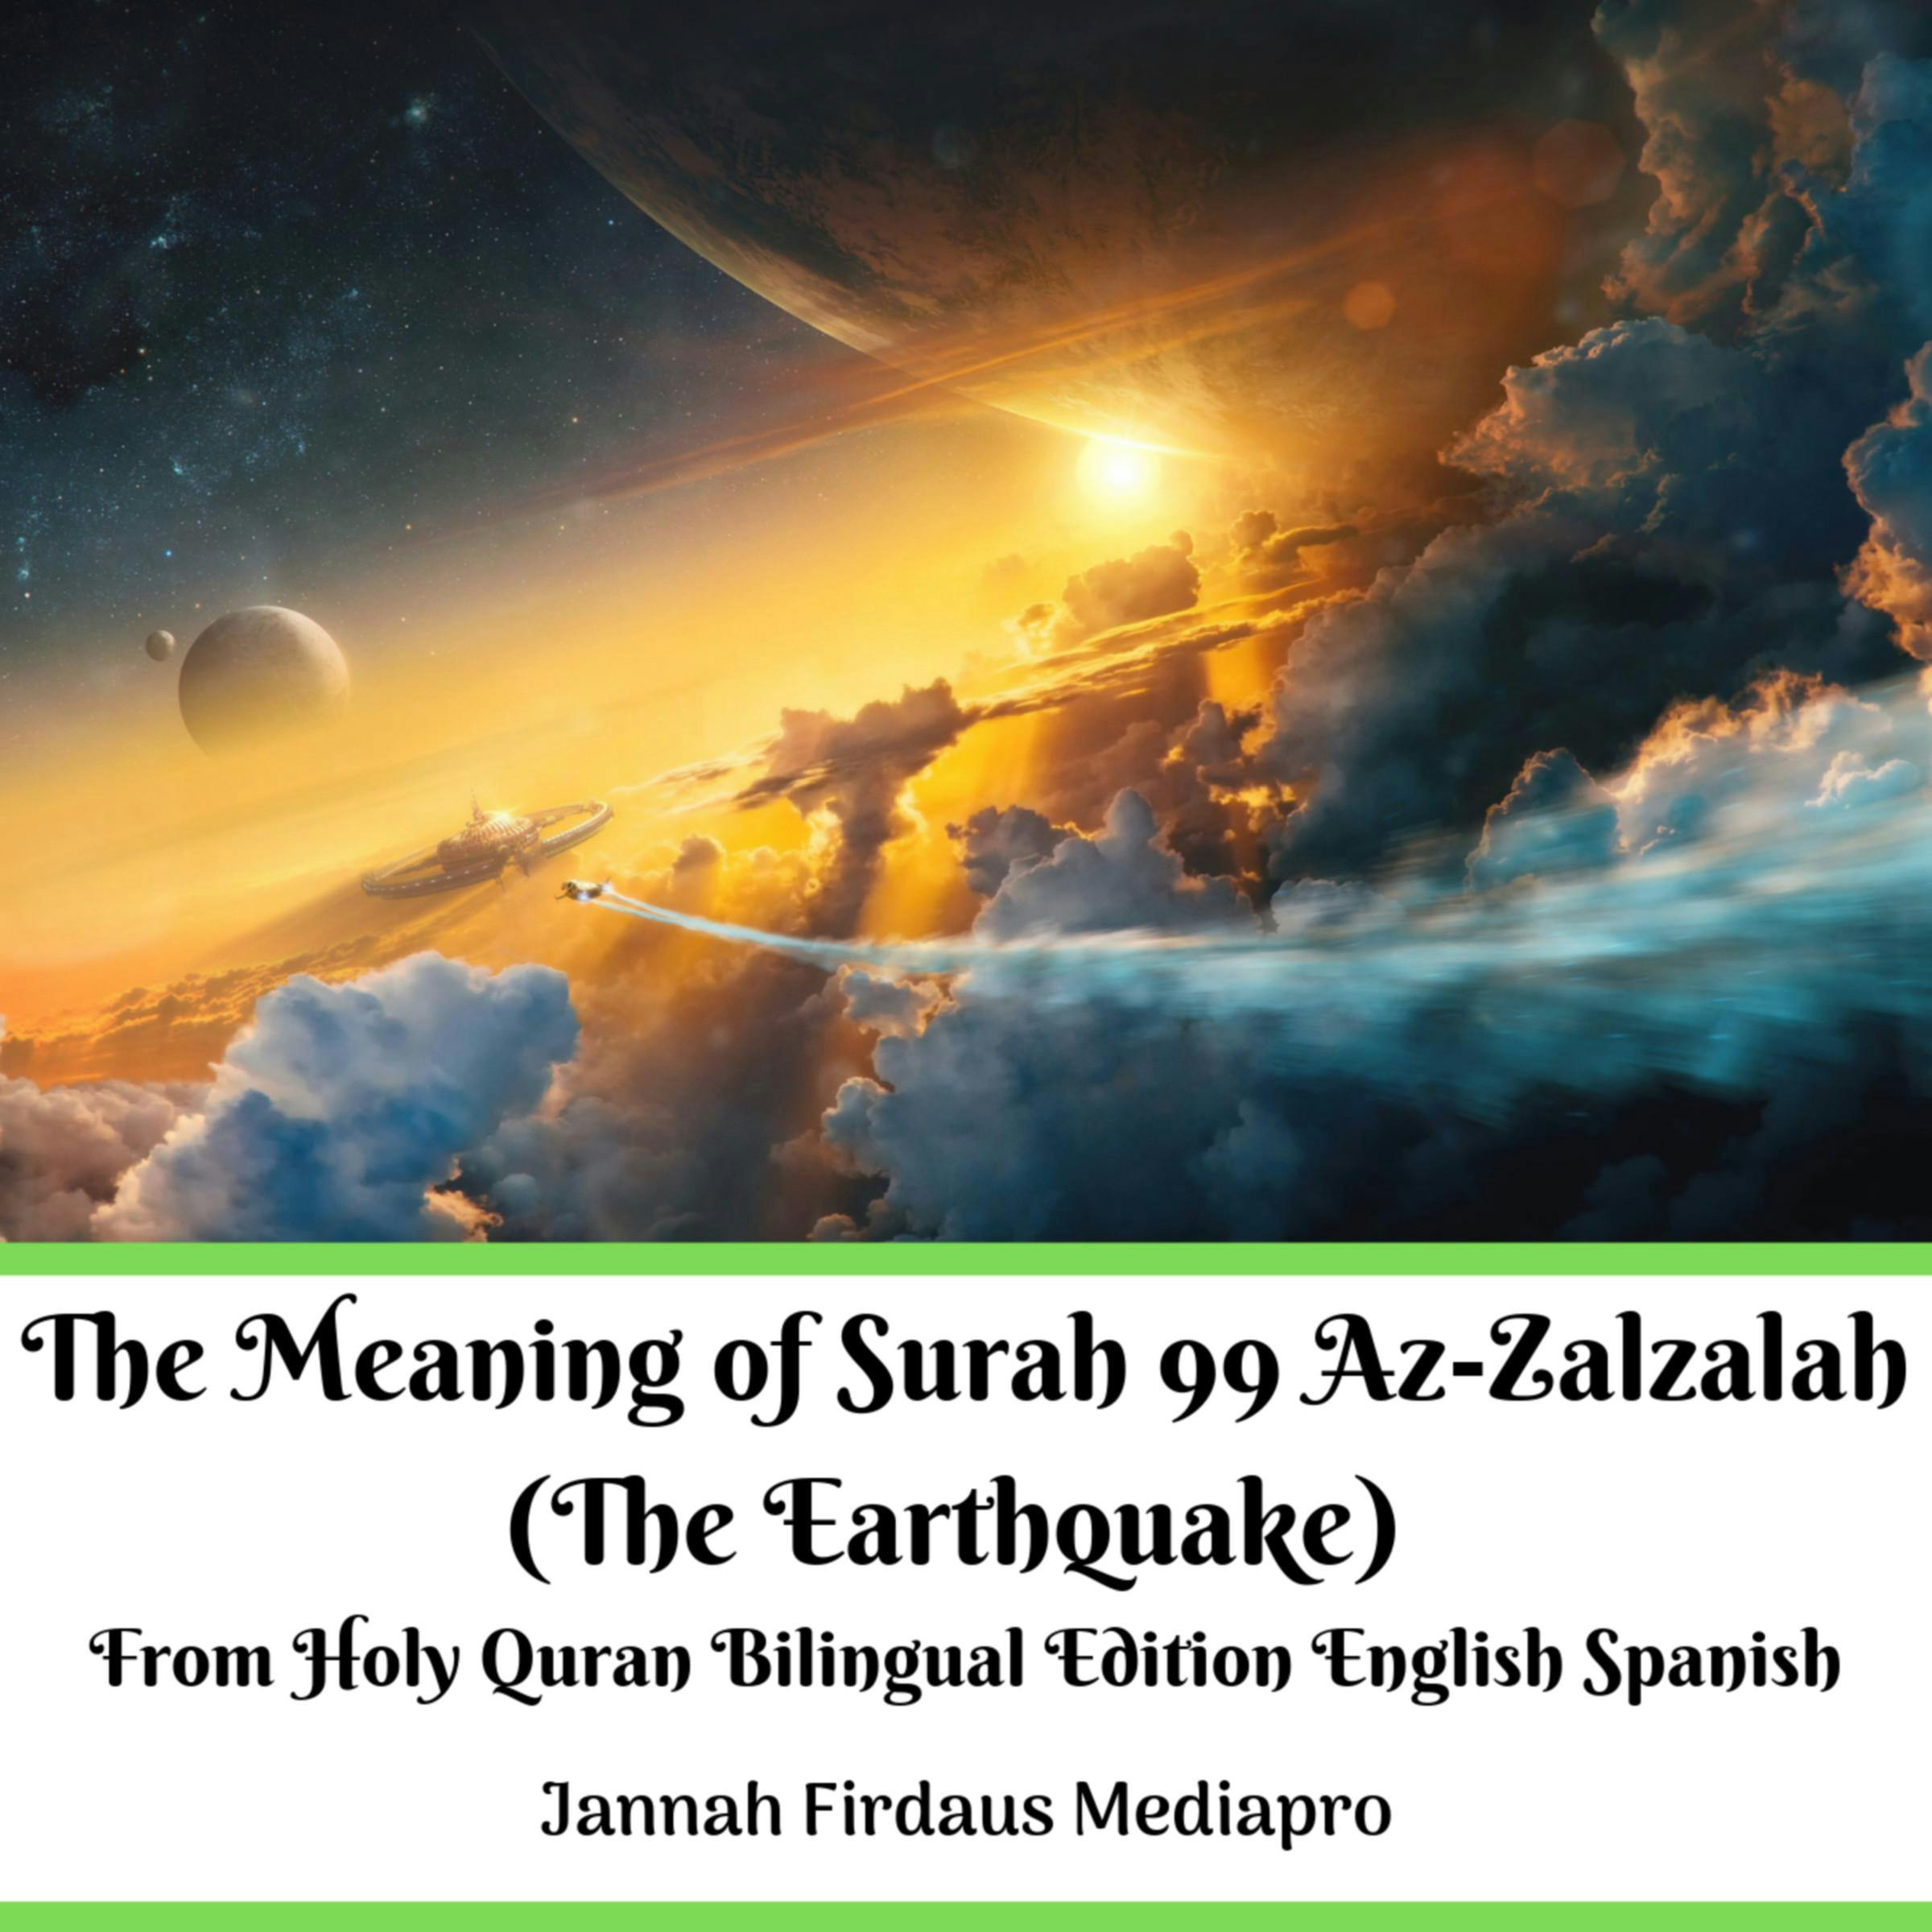 The Meaning of Surah 99 Az-Zalzalah (The Earthquake): From Holy Quran Bilingual Edition English Spanish - undefined